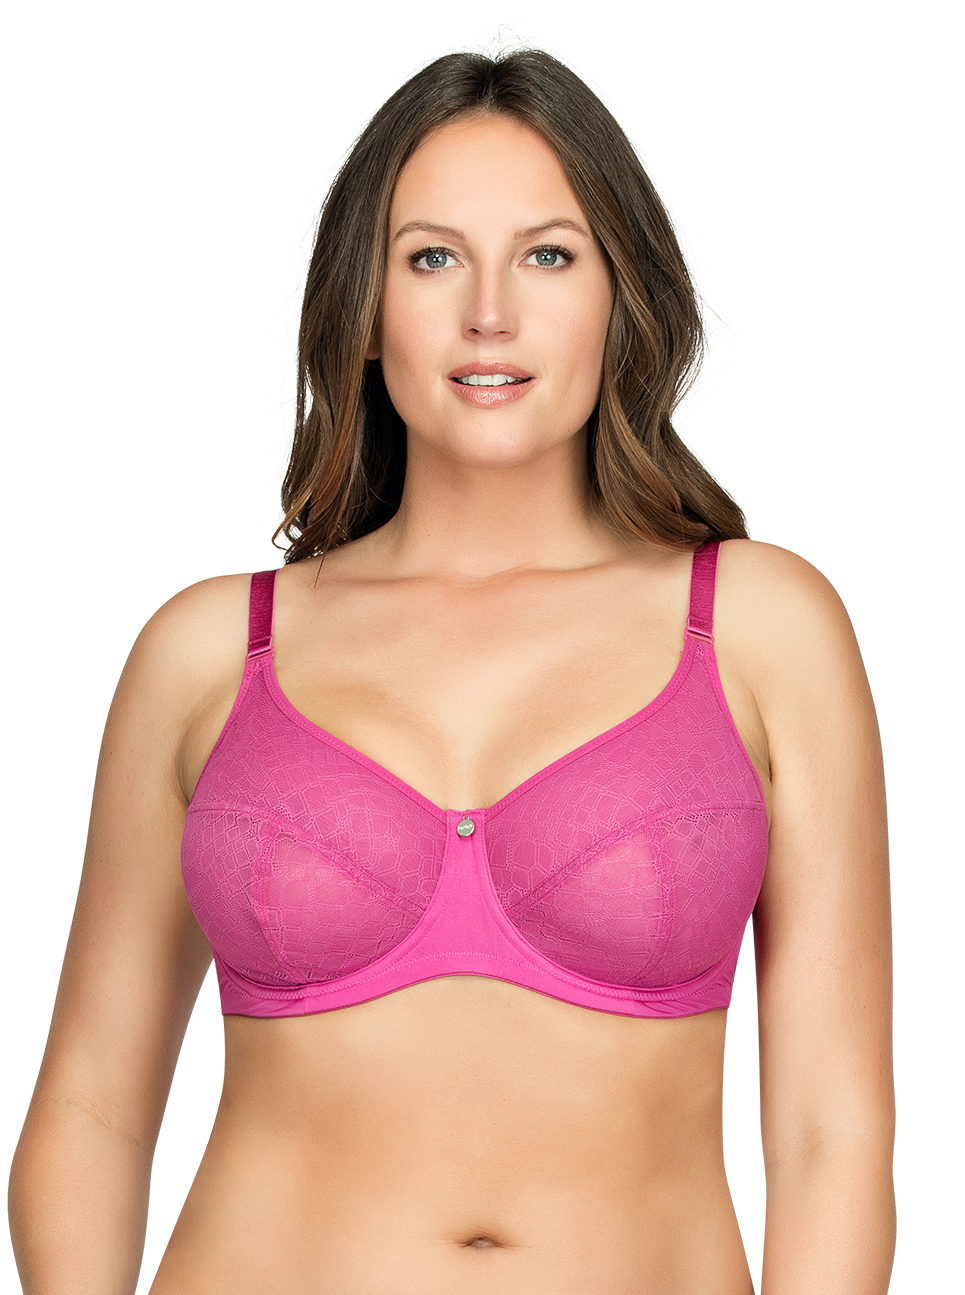 Minimizer Bras How They Work Plus 12 Of The Prettiest The Breast Life 